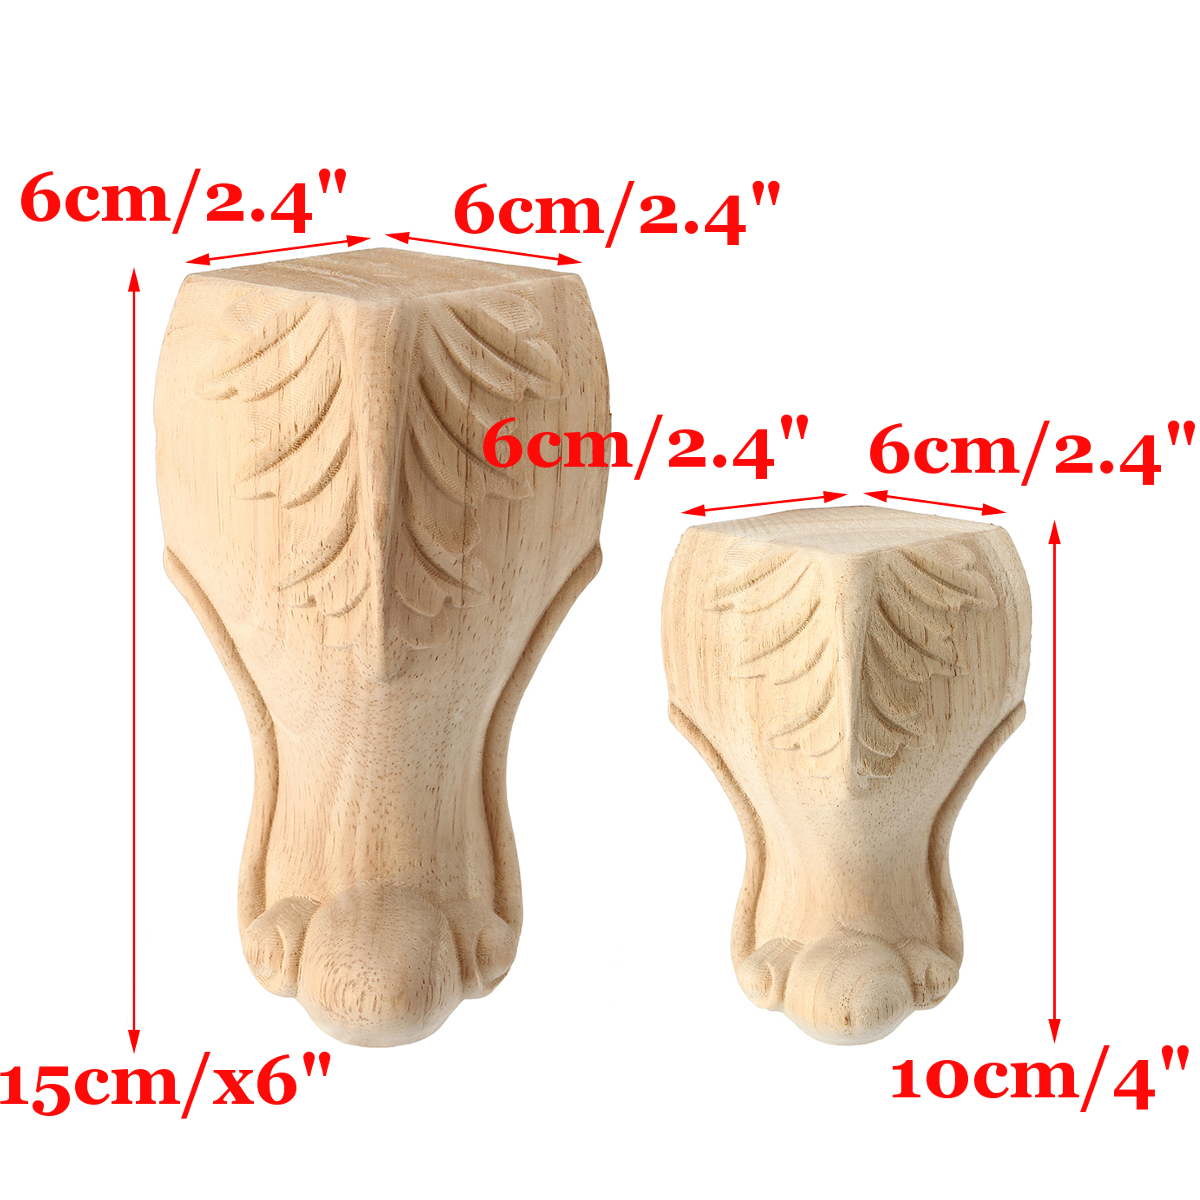 4Pcs-1015cm-European-Solid-Wood-Applique-Carving-Furniture-Foot-Legs-Unpainted-Cabinet-Feets-Decal-1322685-5